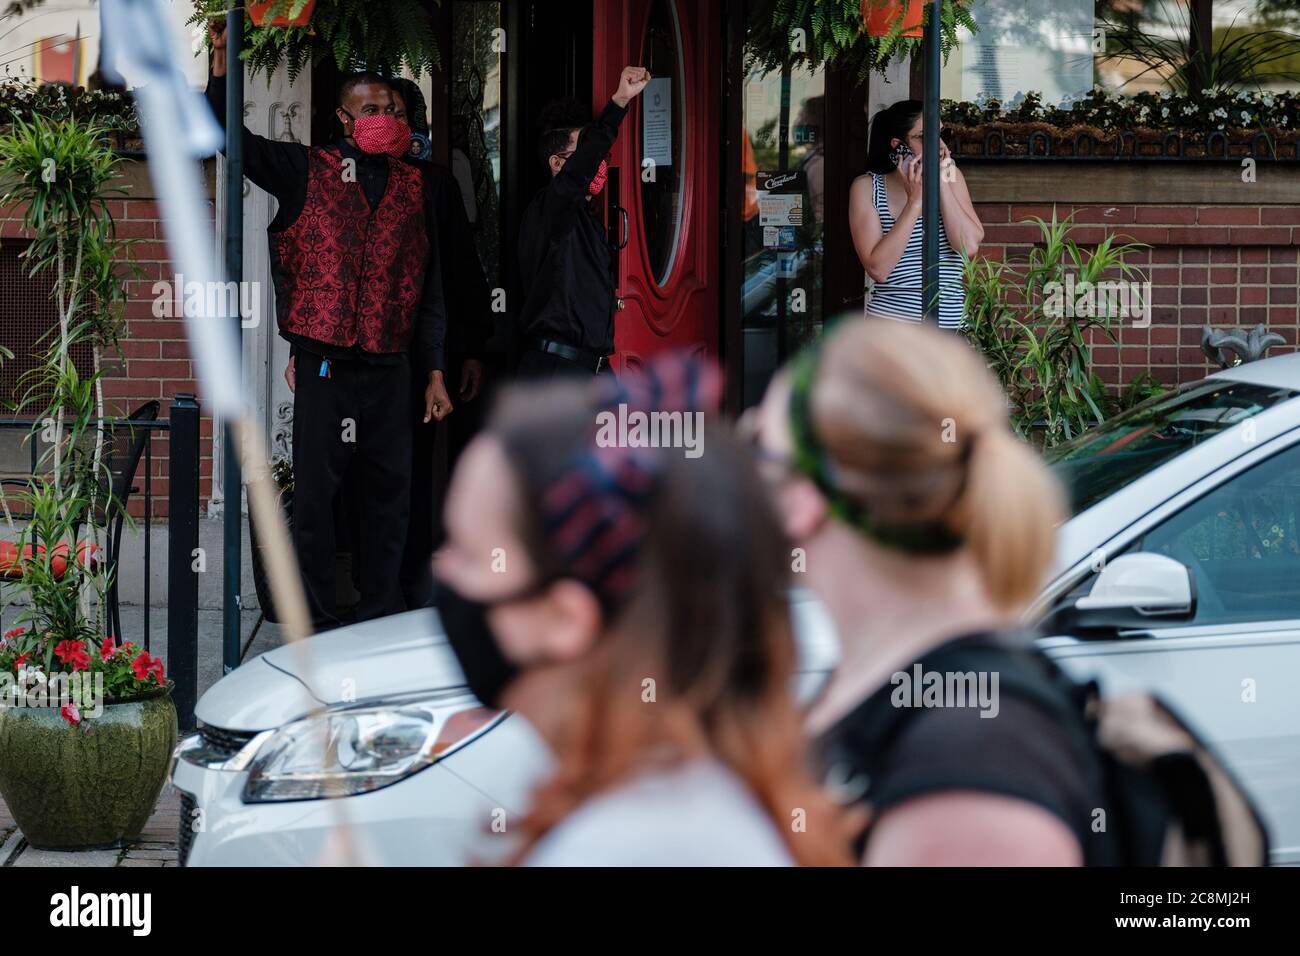 Cleveland, Ohio, USA. 25th July, 2020. Restaurant workers are seen showing solidarity for protestors during a ''No Facist Military War On The People'' protest, Saturday, July 25, 2020 in Cleveland, Ohio. Credit: Andrew Dolph/ZUMA Wire/Alamy Live News Stock Photo